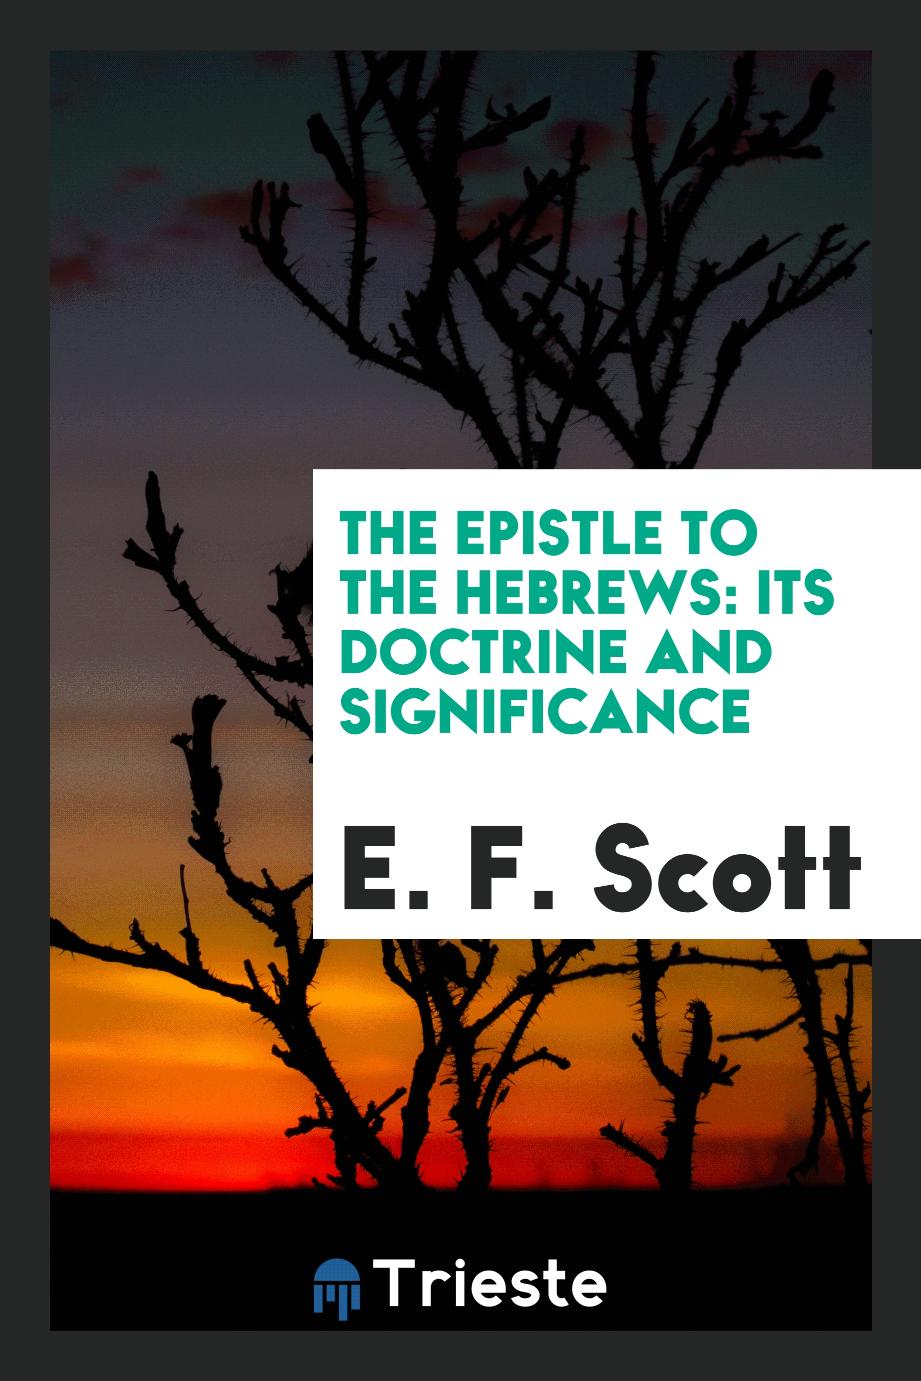 The Epistle to the Hebrews: its doctrine and significance